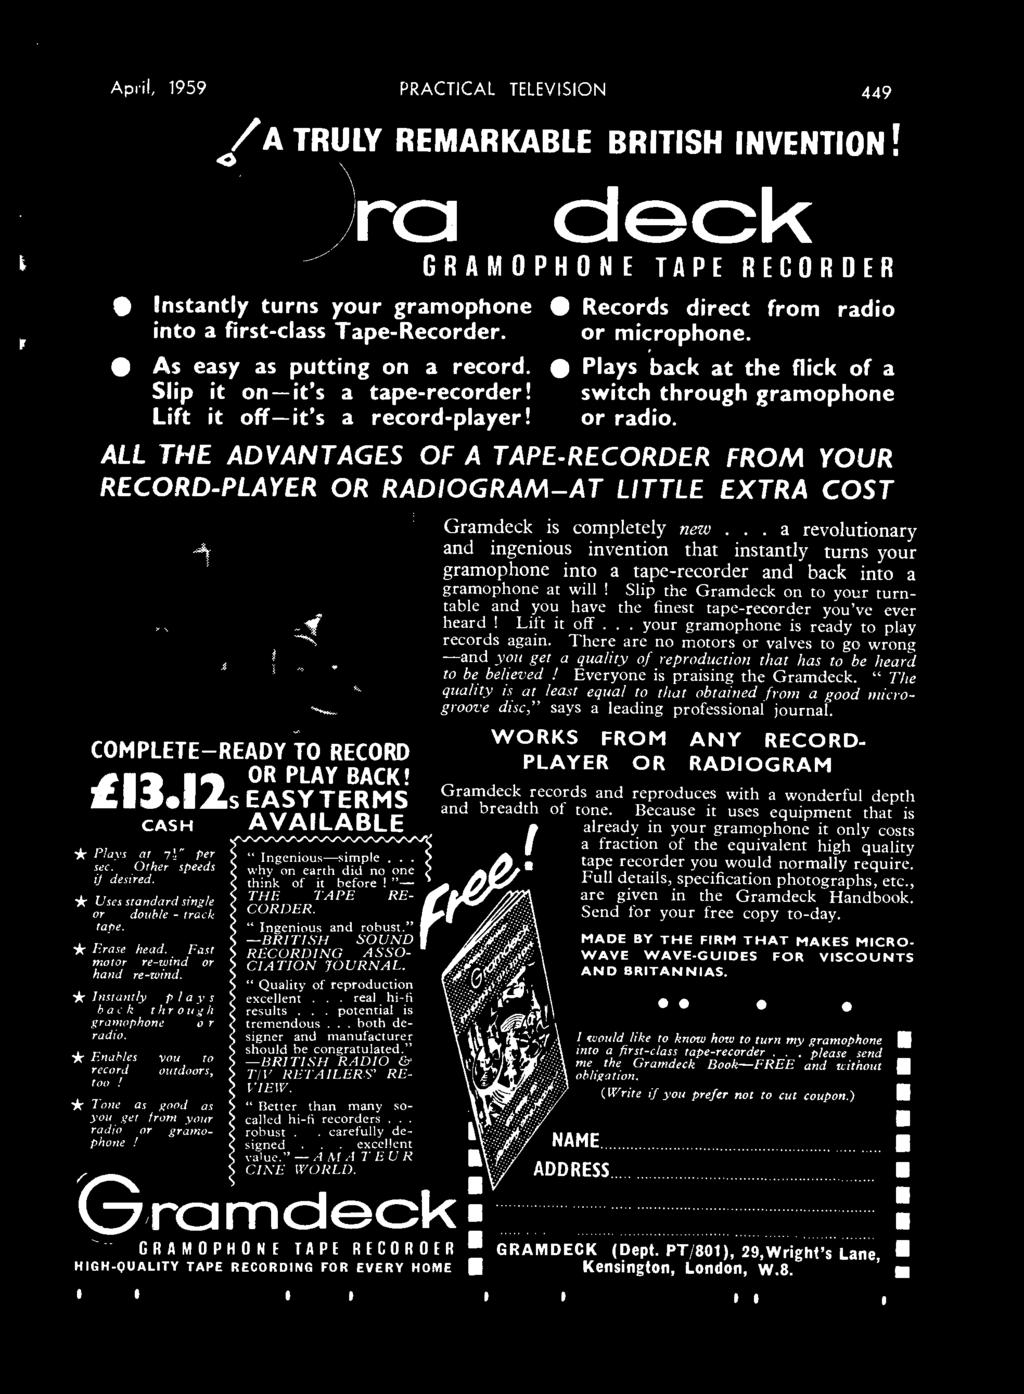 Plays back at the flick of a switch through gramophone or radio. ALL THE ADVANTAGES OF A TAPE -RECORDER FROM YOUR RECORD- PLAYER OR RADIOGRAM -AT LITTLE EXTRA COST COMPLETE -READY TO RECORD í13.